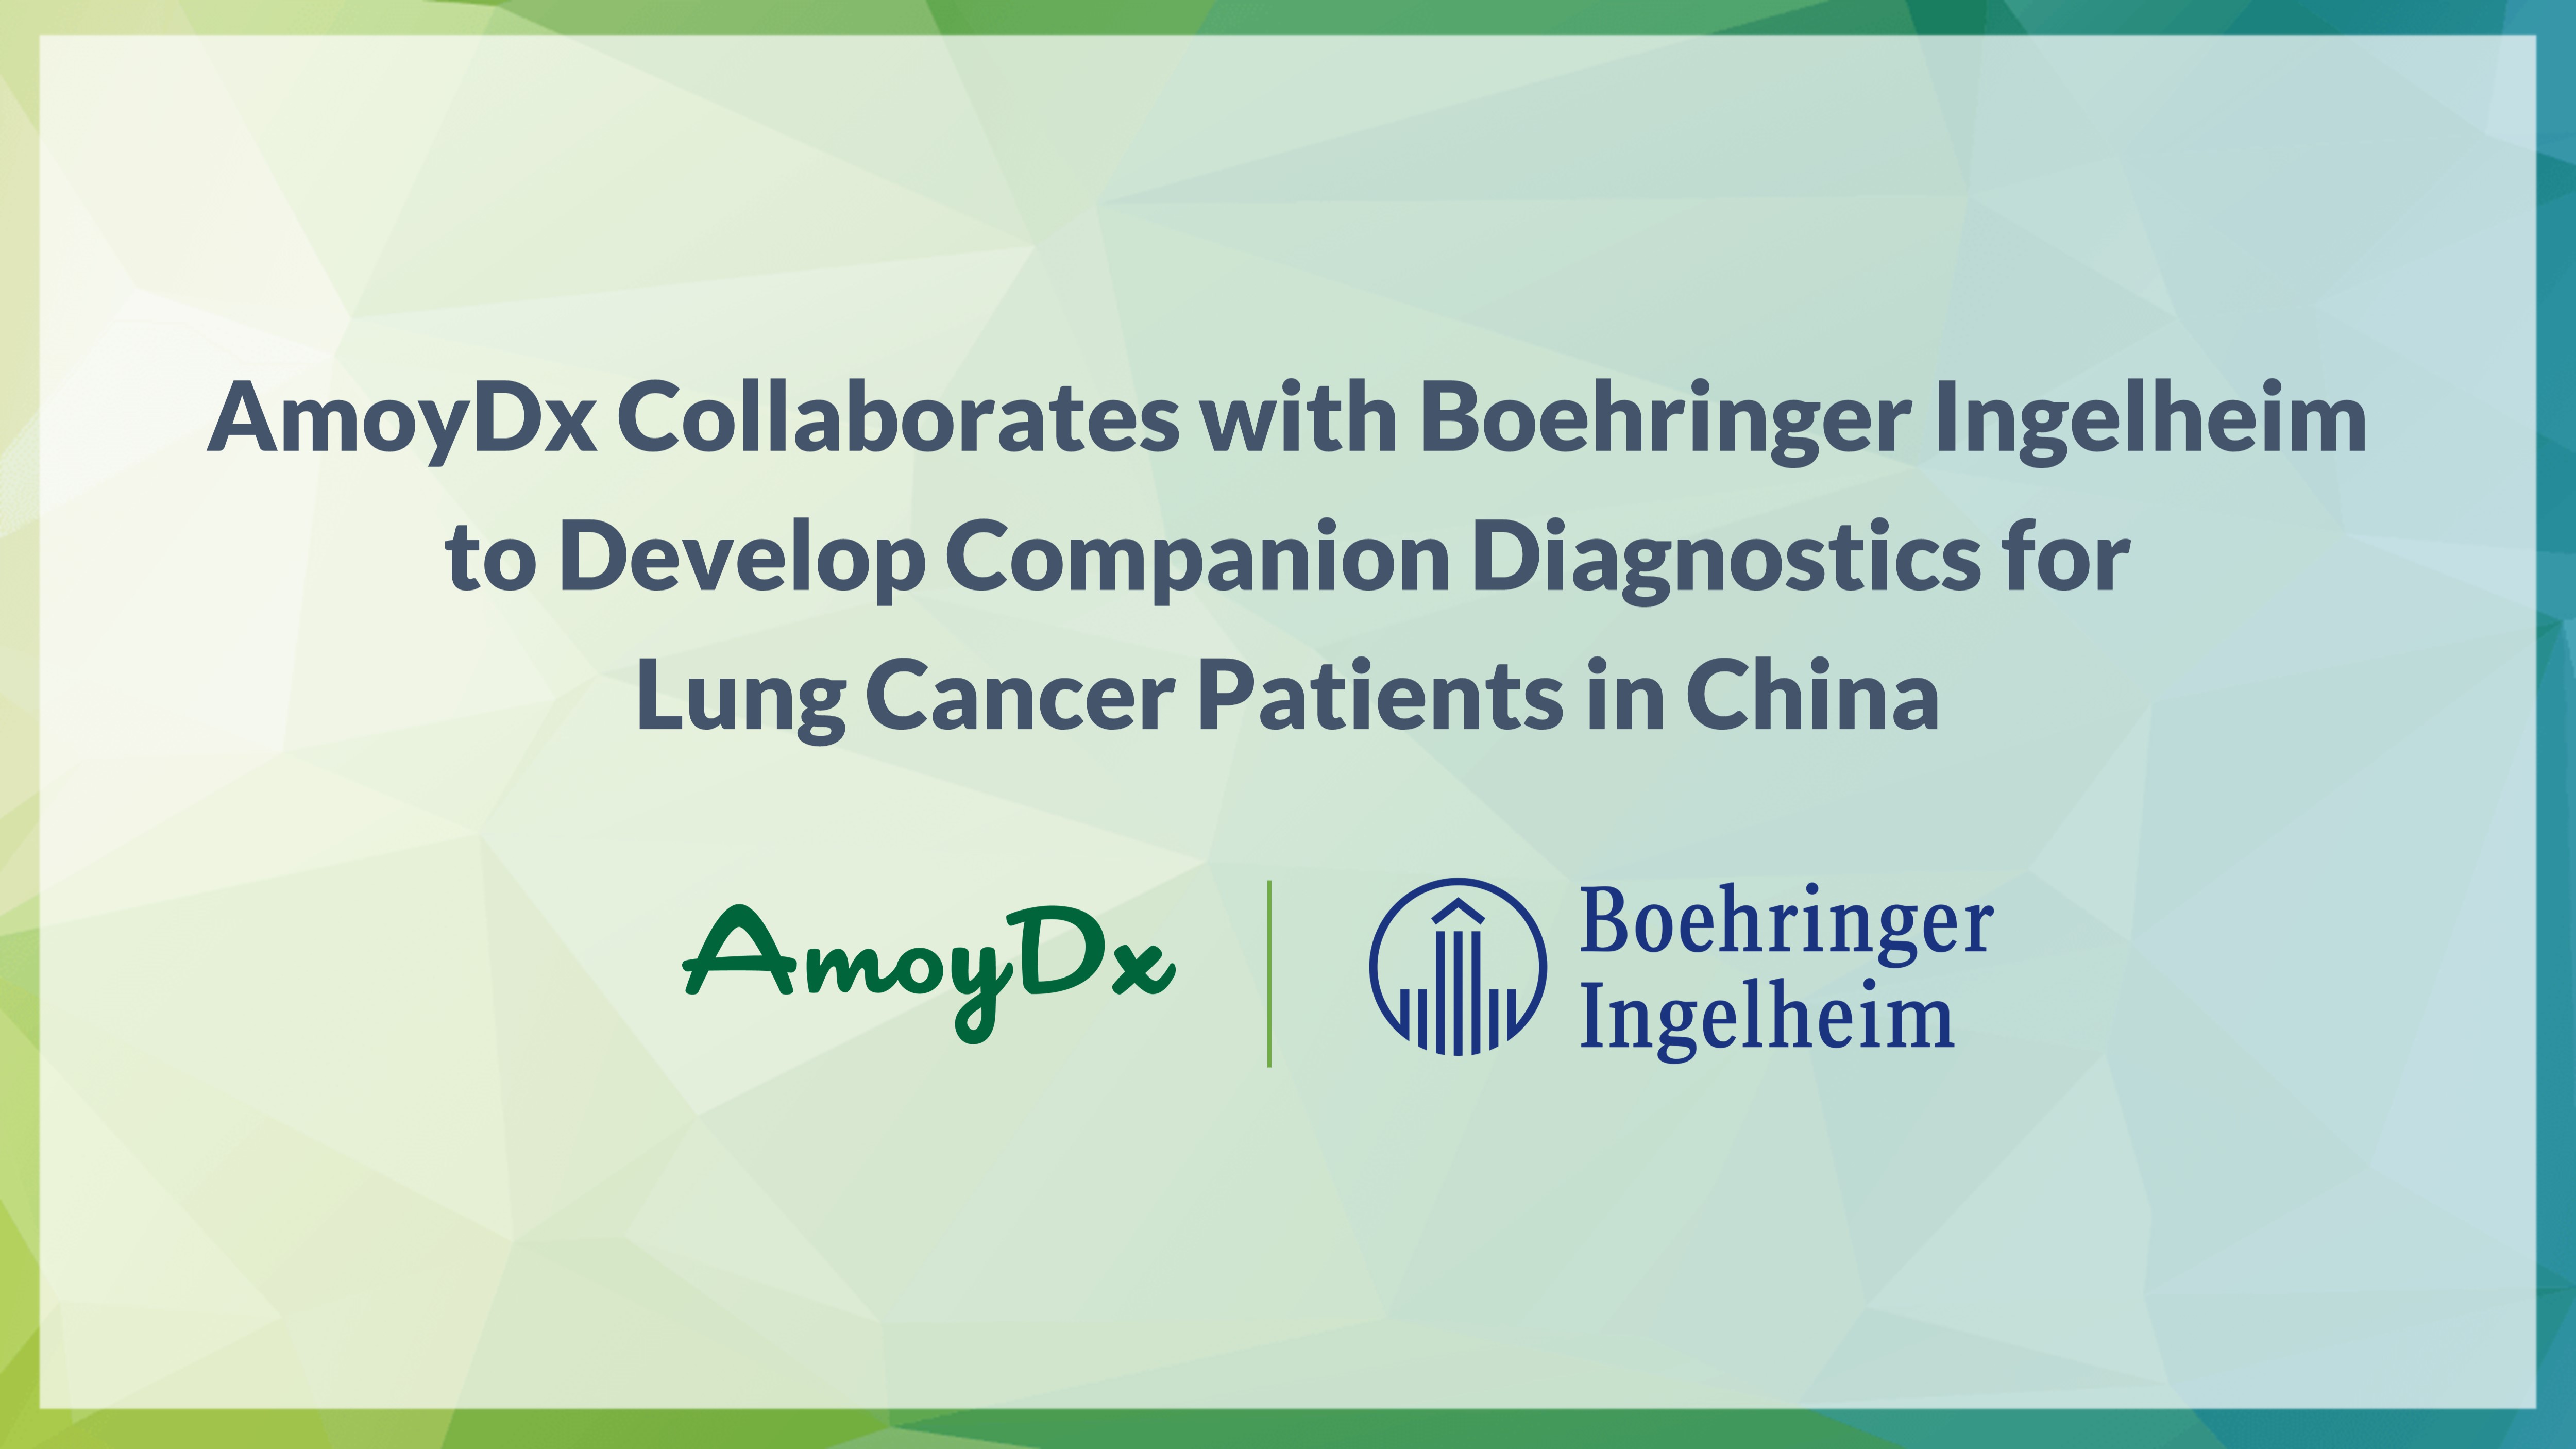 AmoyDx Collaborates with Boehringer Ingelheim 
to Develop Companion Diagnostics for Lung Cancer Patients in China